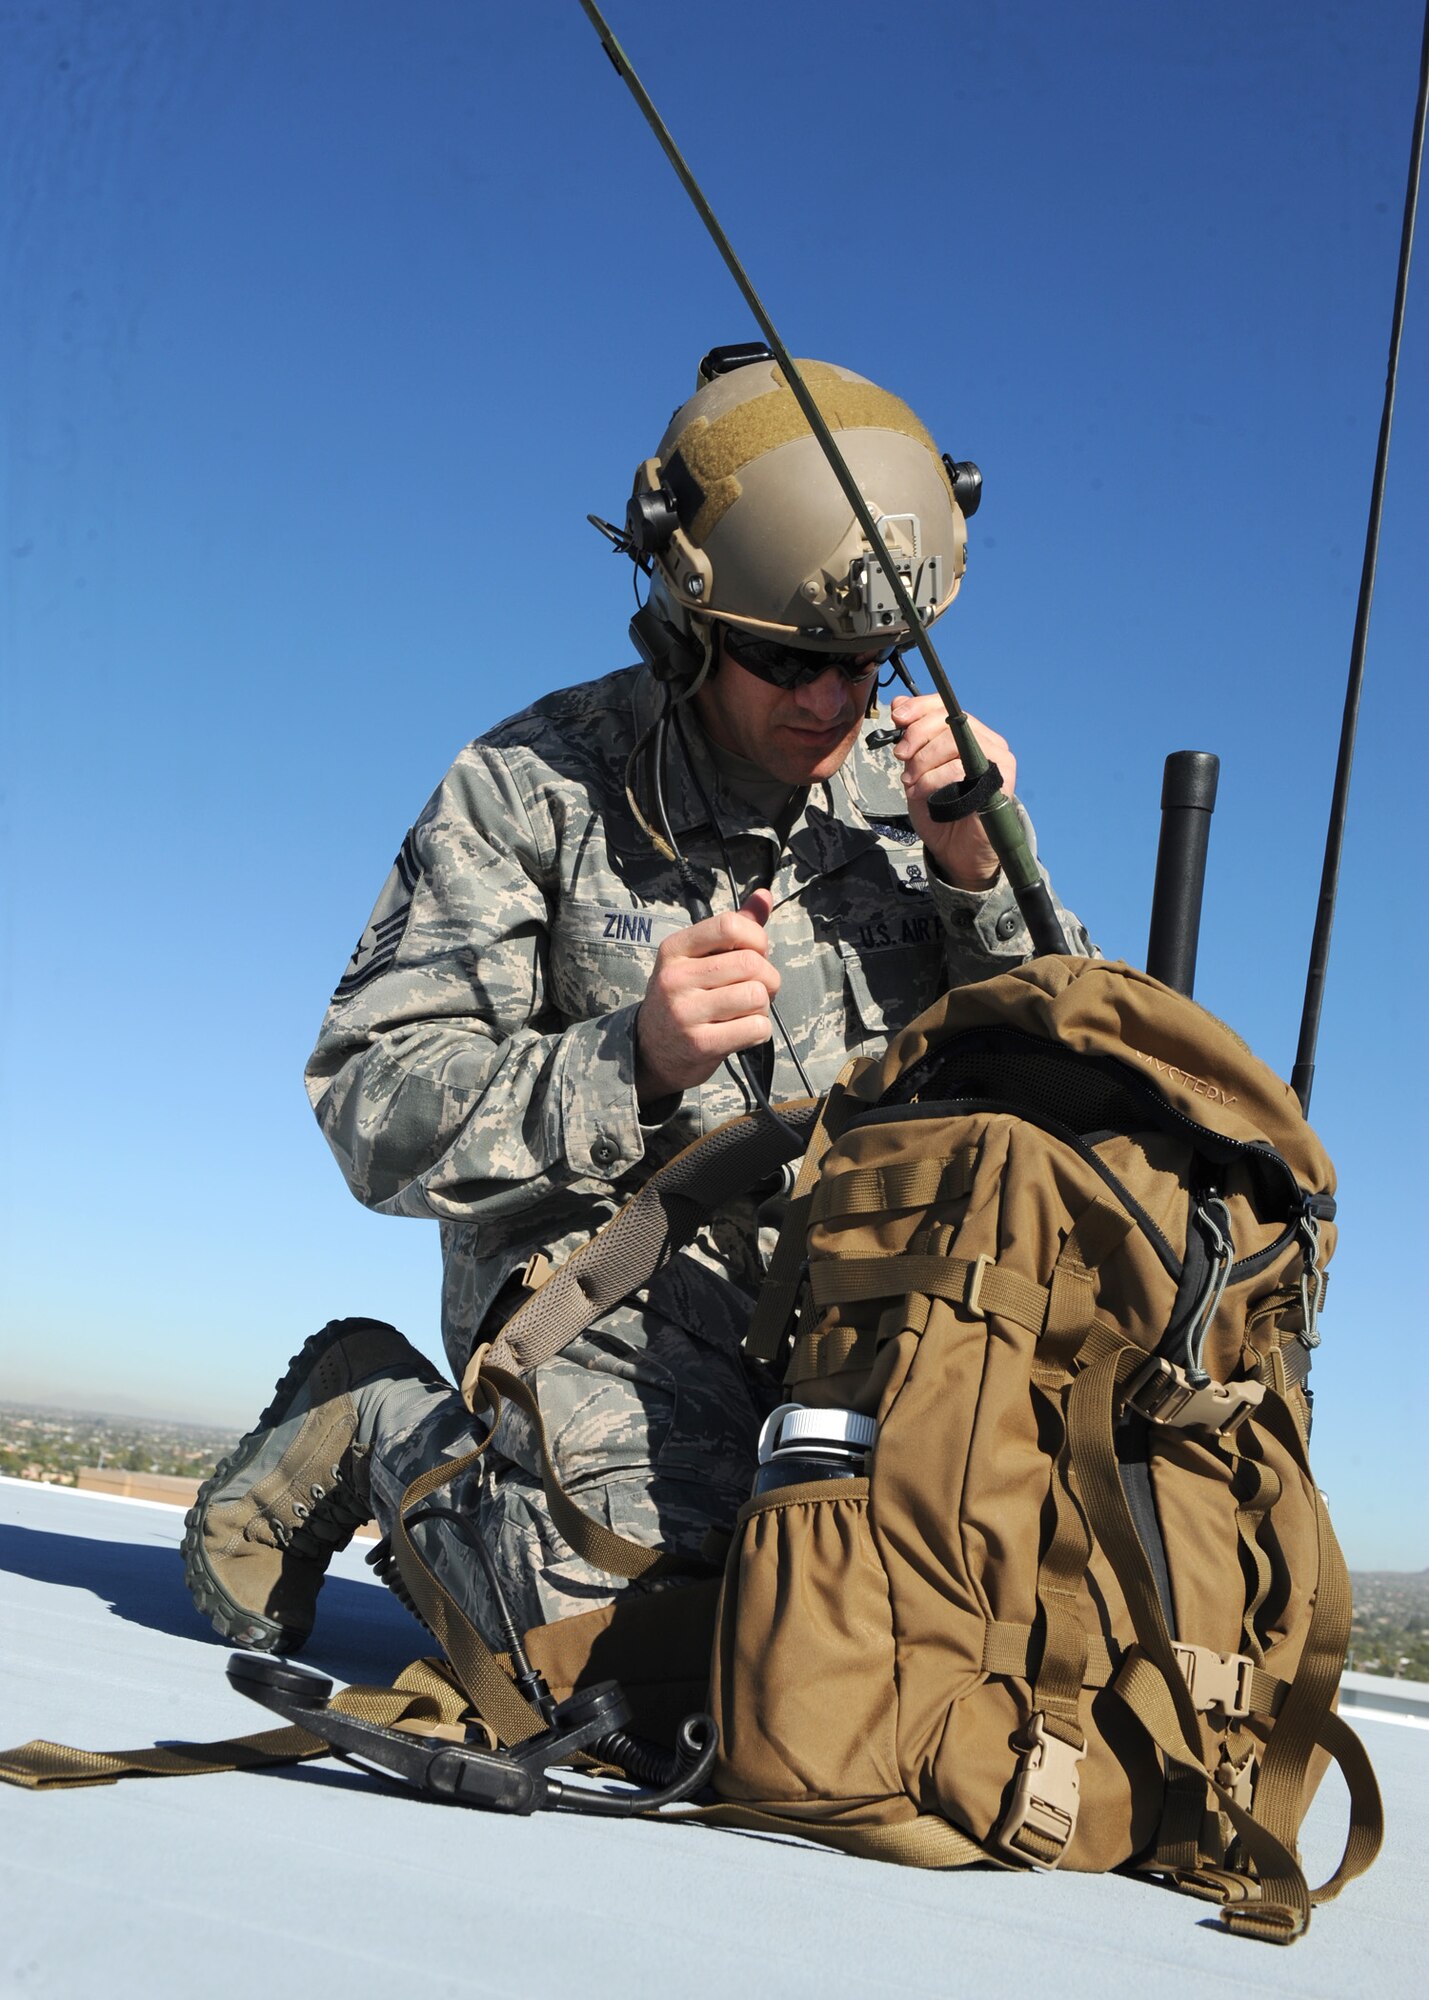 U.S. Air Force Senior Master Sgt. Nathan Zinn, 48th Rescue Squadron superintendent, checks his radio equipment in preparation of Angel Thunder at University of Arizona Medical Center Oct. 11.  Angel Thunder has been specifically designed to incorporate “whole-of-government,” ensuring that every government department and agency understands the core competencies, roles, missions and capabilities of its partners and works together to achieve common goals. (U.S. Air Force photo by Senior Airman Brittany Dowdle)